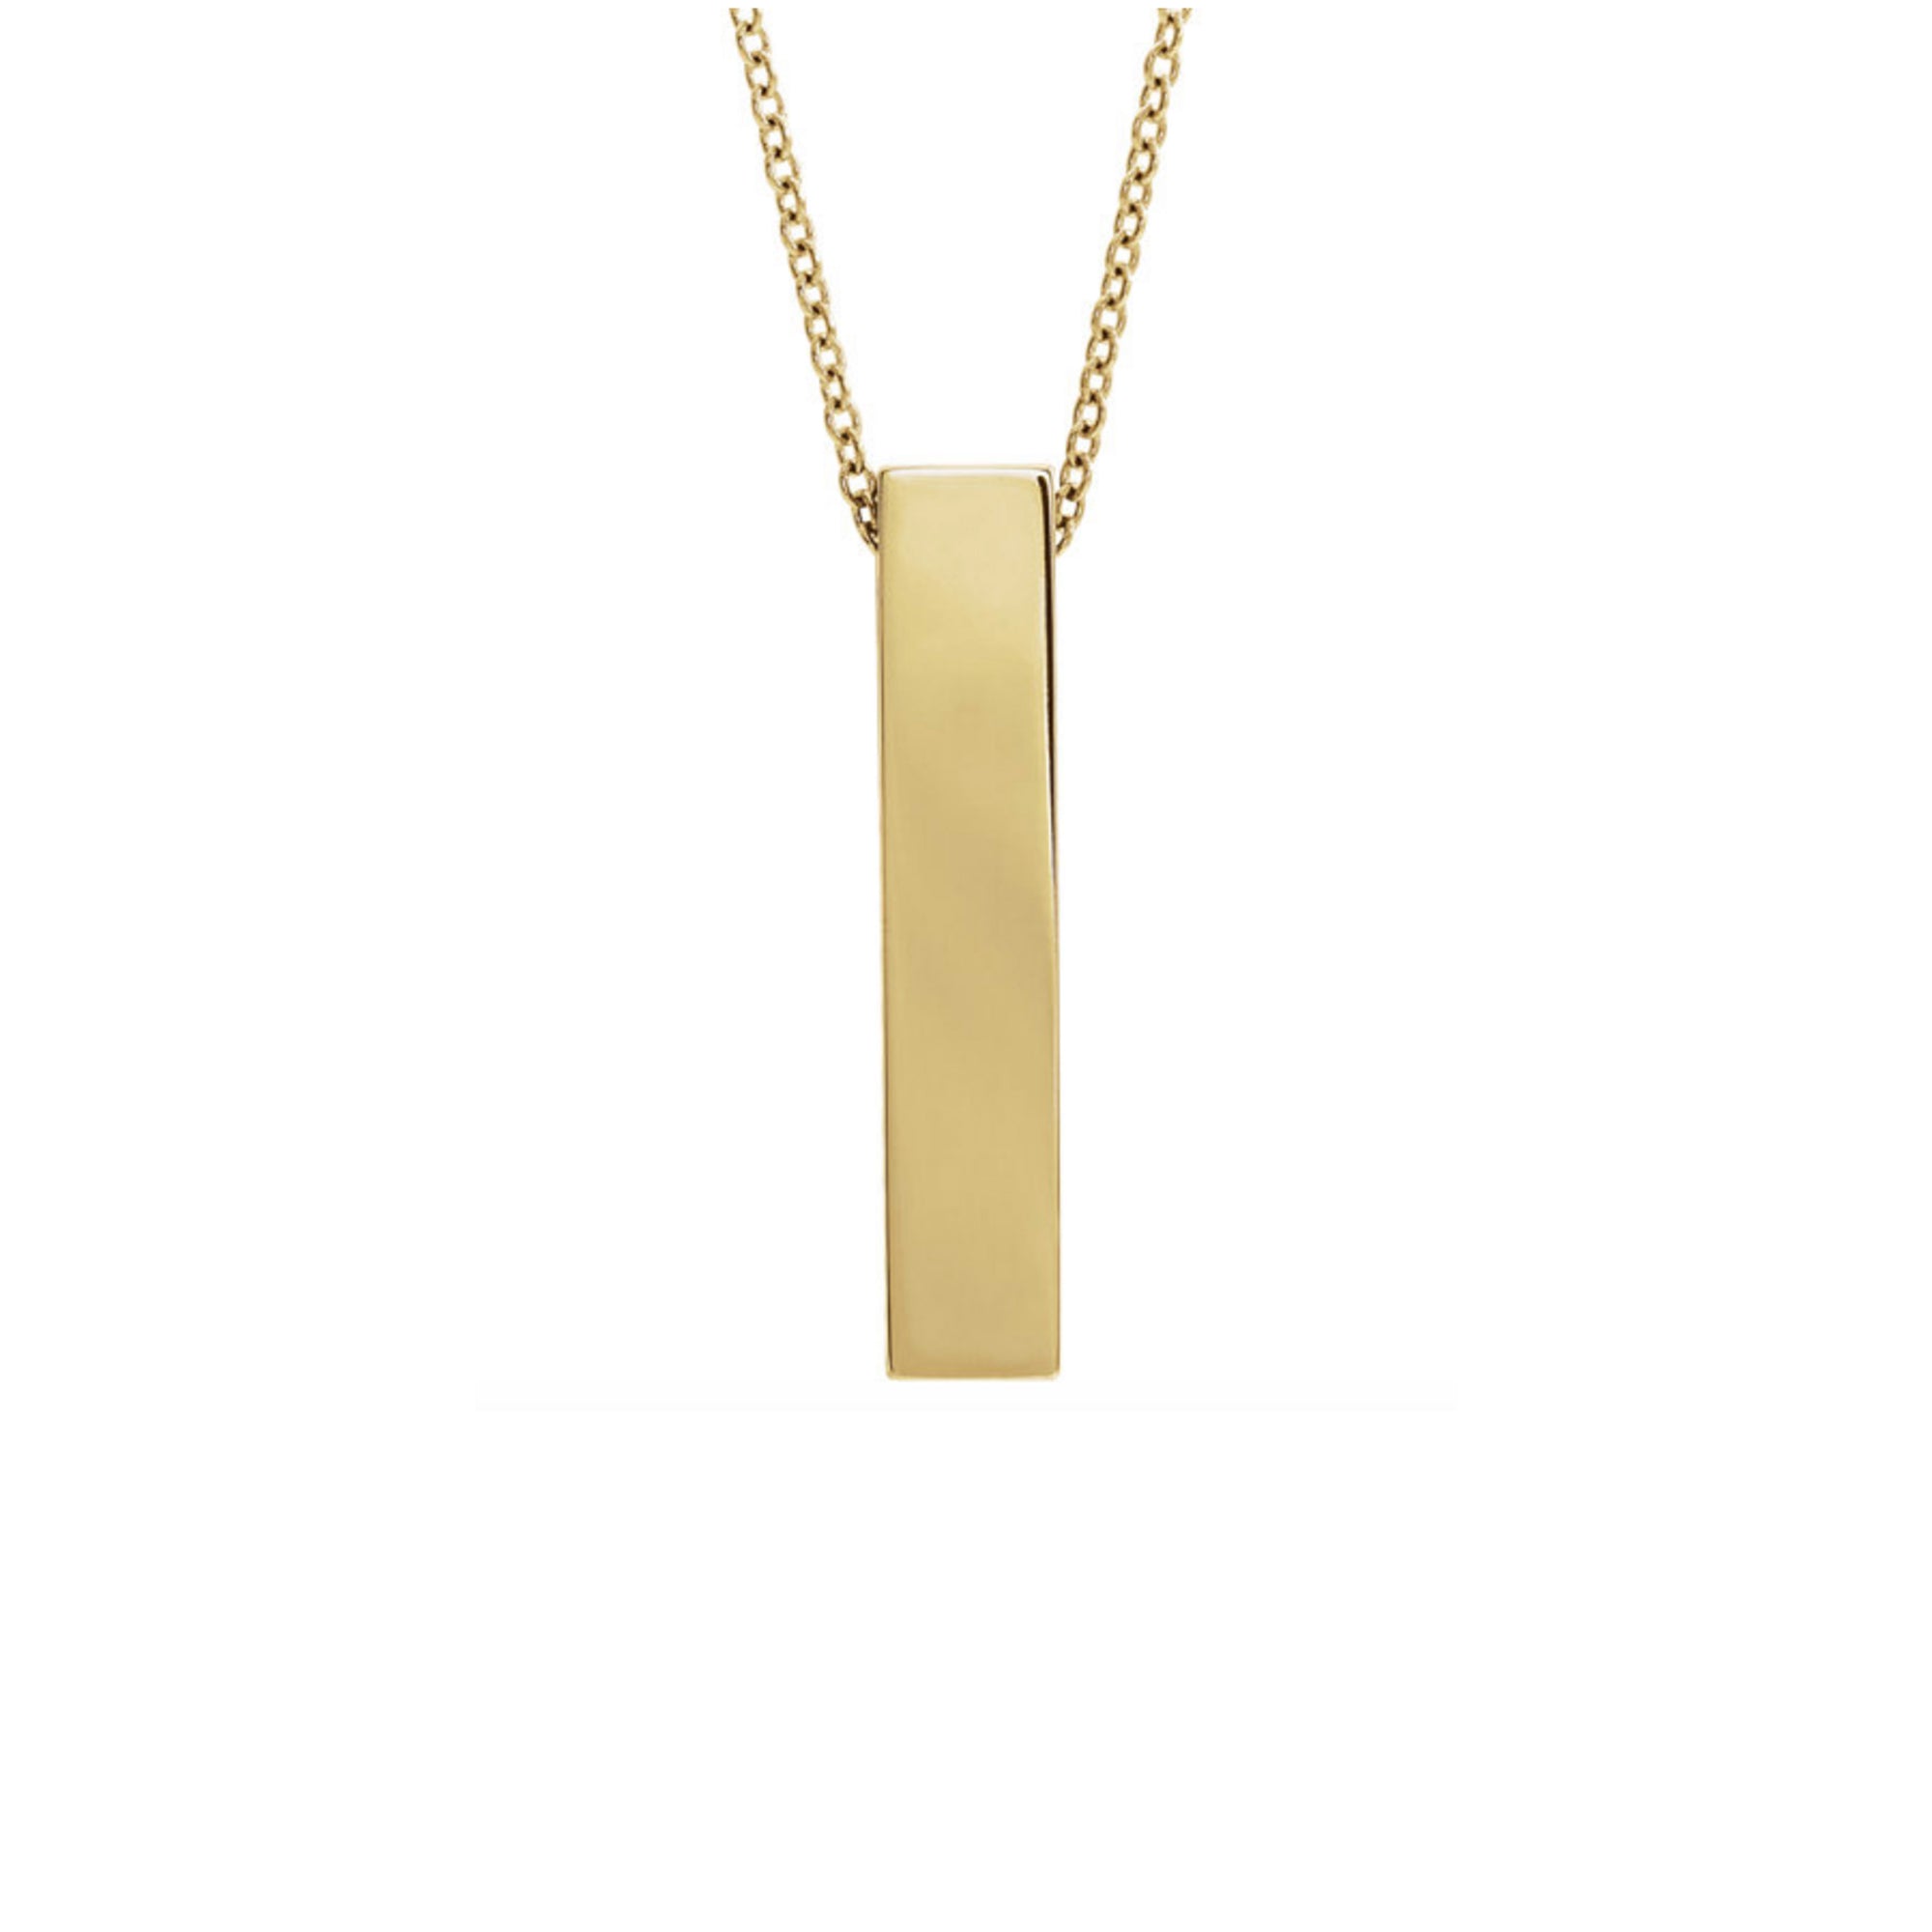 Custom Engravable Vertical Bar Necklace in White, Yellow or Rose Gold - Talisman Collection Fine Jewelers